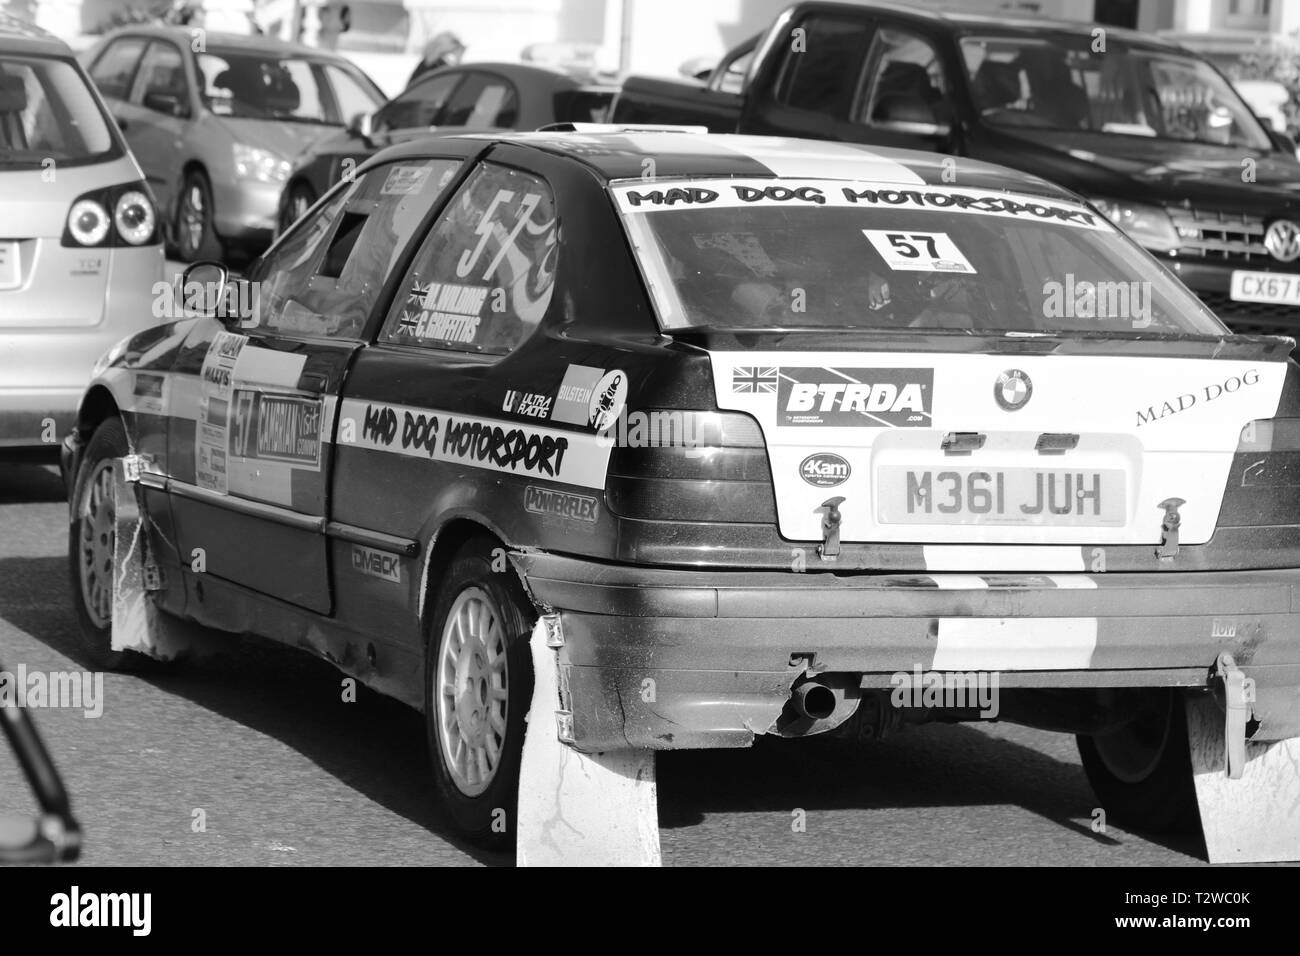 Cambrian rally, Llandudno, Wales. the images are taken in monochrome Stock Photo